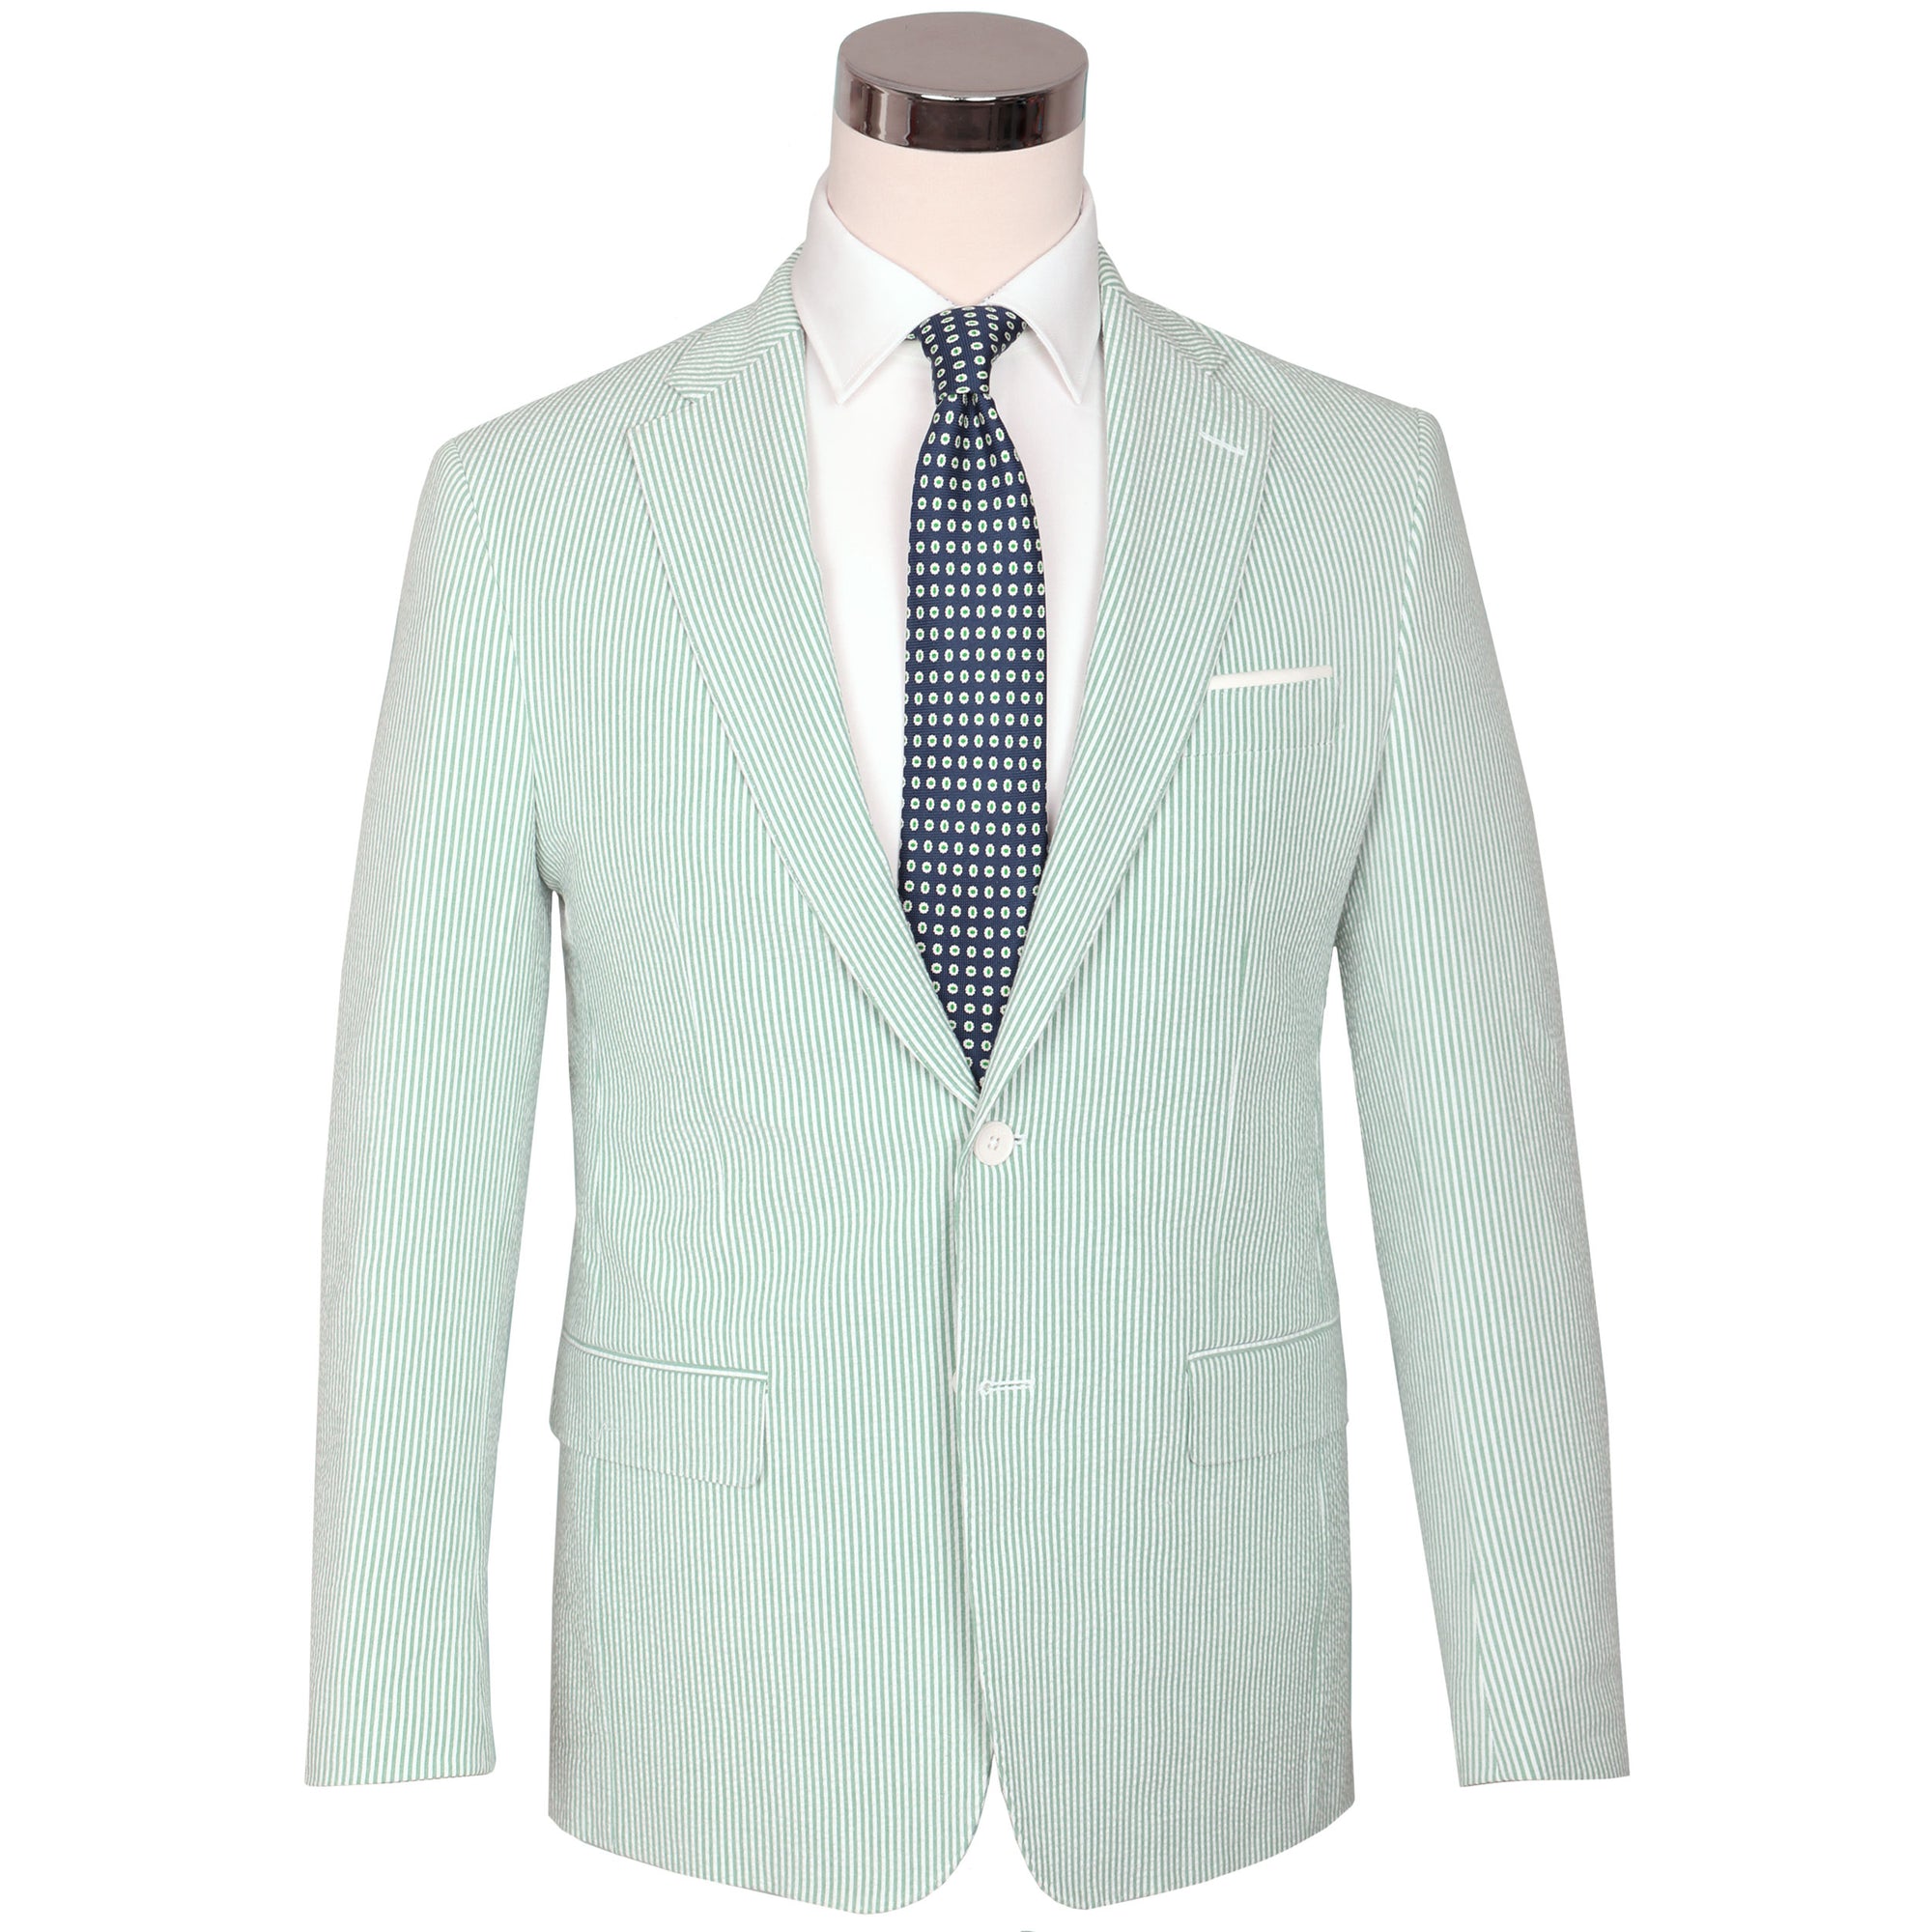 The chill of a pewter cup, the finish of a fine Kentucky bourbon, & the crunch of that good ice - get that Derby Day feeling in our refreshingly minty stretch seersucker.   97% Cotton / 3% Lycra Haspel Exclusive Seersucker Stretch Fabric • Maximized Seersucker Pucker • Audubon Classic Fit • Natural Shoulder • Two Buttons • Flap Pockets • 3/4 Lined for Maximum Cool • Side Vents • Notch Lapel • Dry Clean • Made in USA